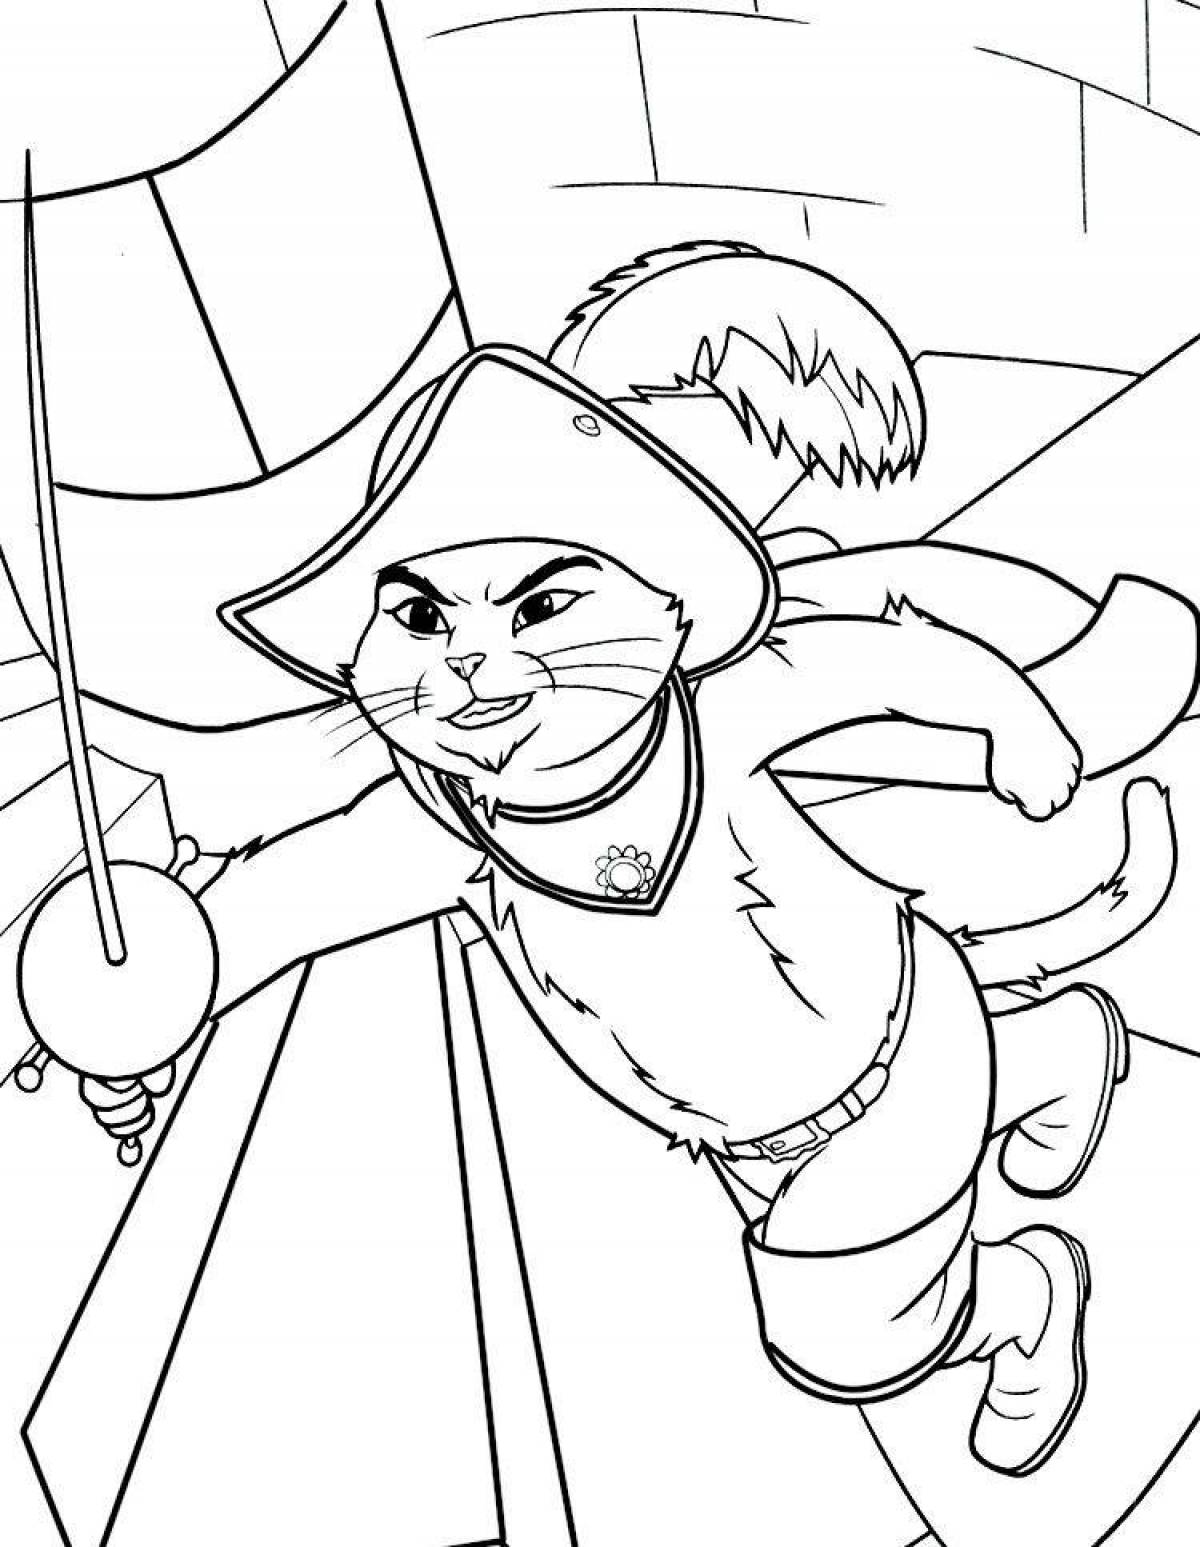 Joyful puss in boots coloring book for kids